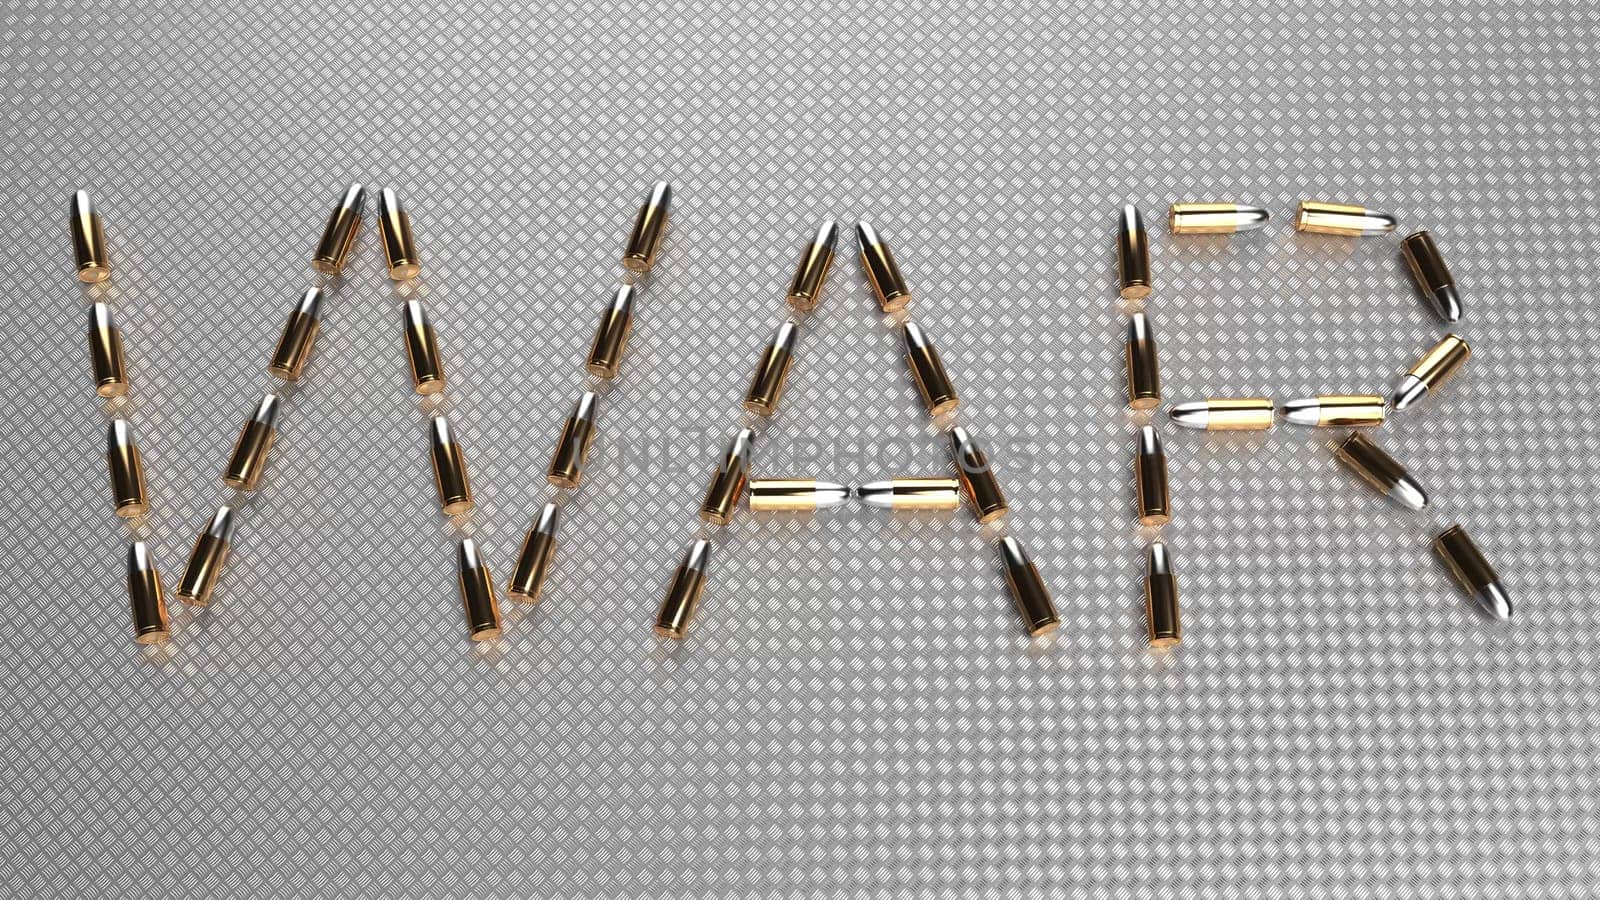 Bullets are laid out in the word WAR on an iron surface 3d render by Zozulinskyi